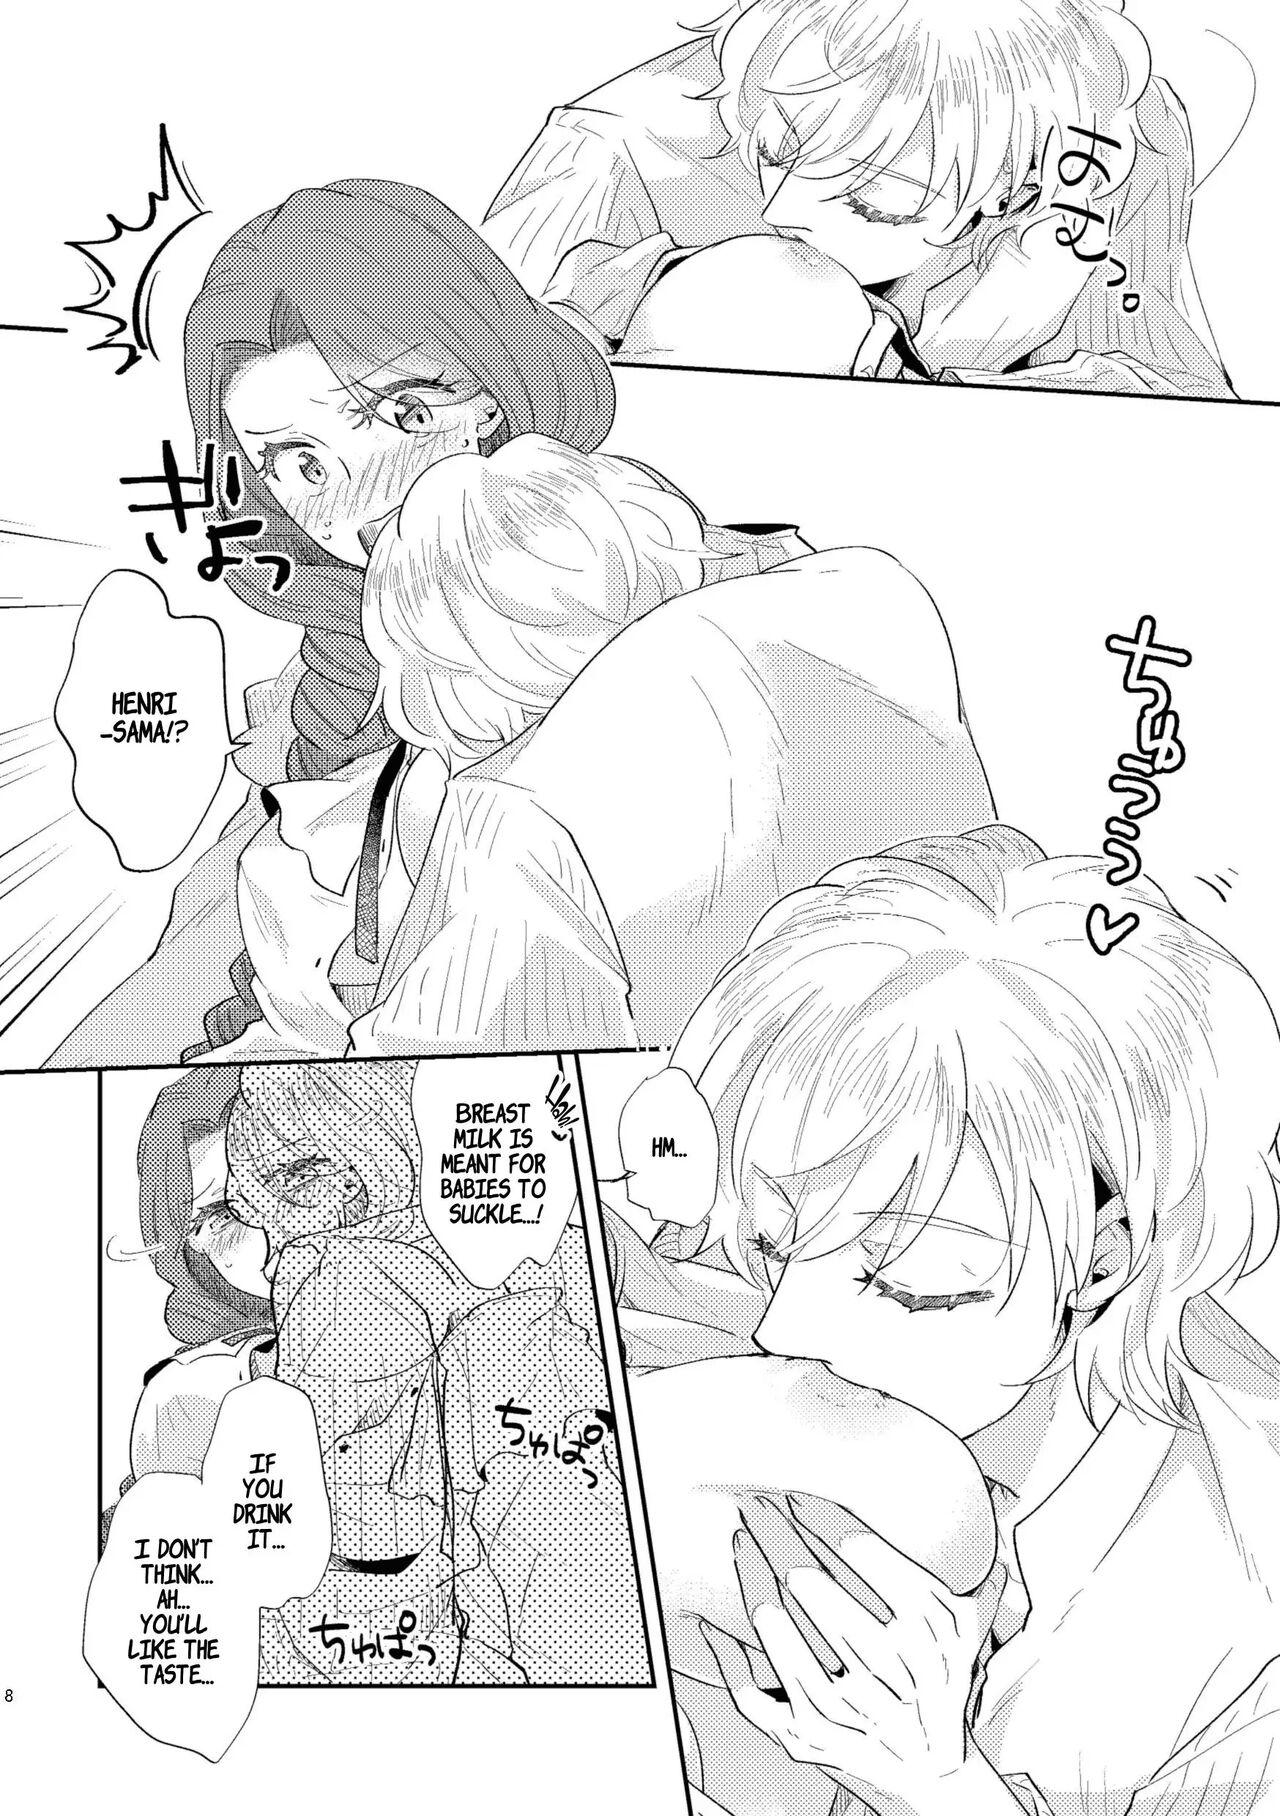 Leche Shounen Ou to Toshiue Ouhi EverAfter | The Boy King and His Older Queen EverAfter Wives - Page 10